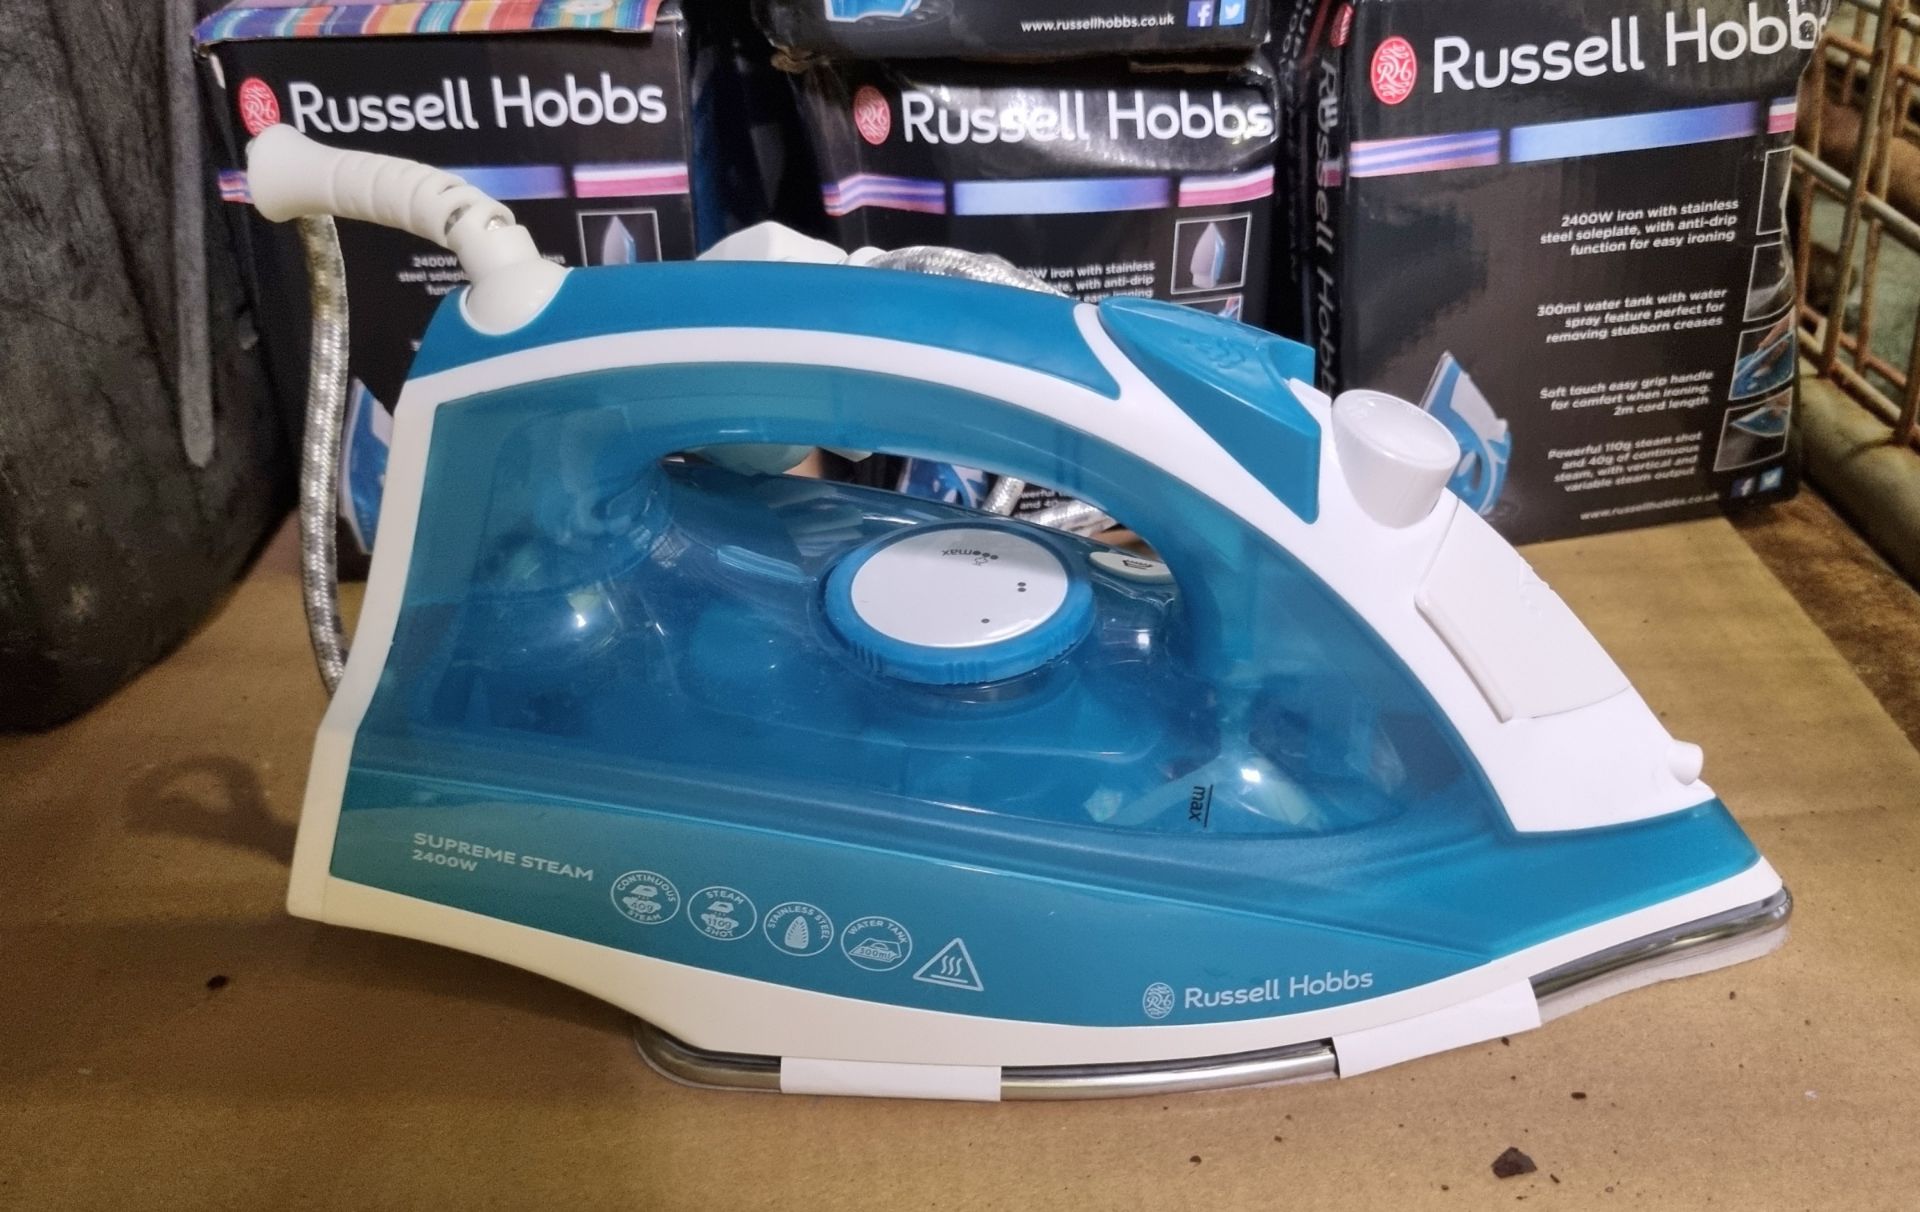 Russell Hobbs Supreme irons, Bathroom lighting fixture, Water canteens - see description for details - Image 6 of 8